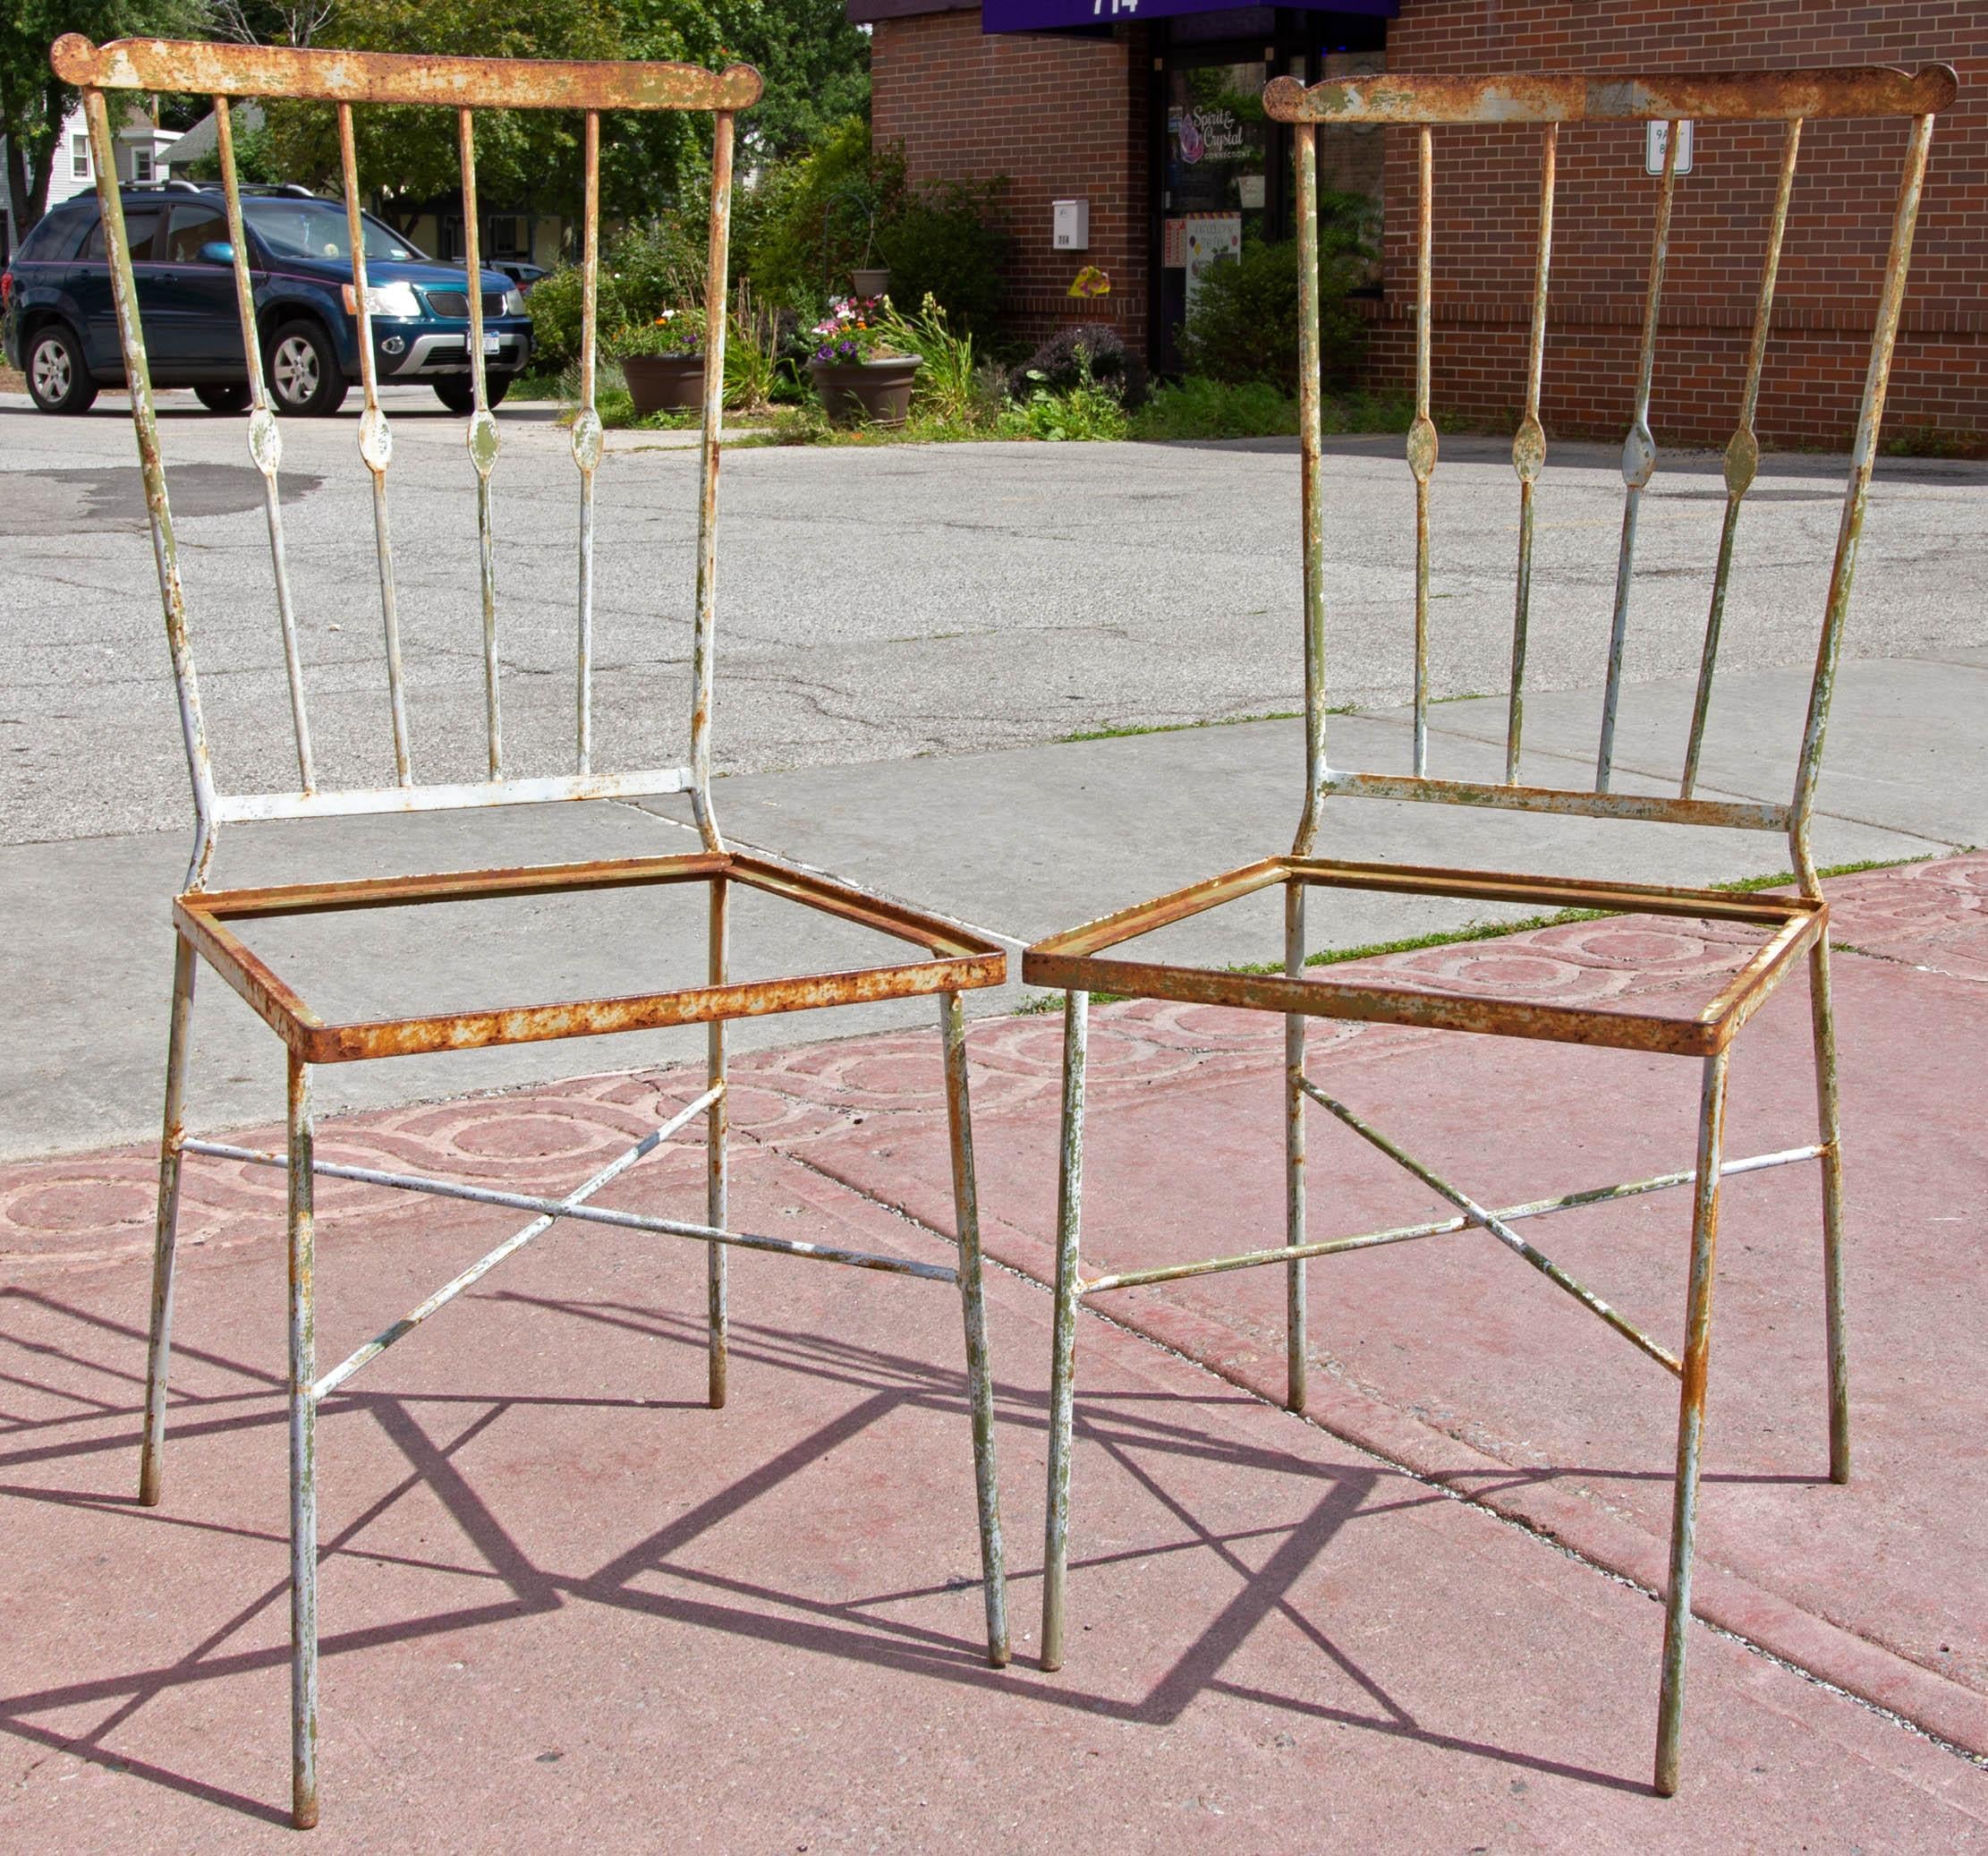 Wrought iron garden chairs with stylized Windsor chair backs. In nice weathered condition, circa 1920s.